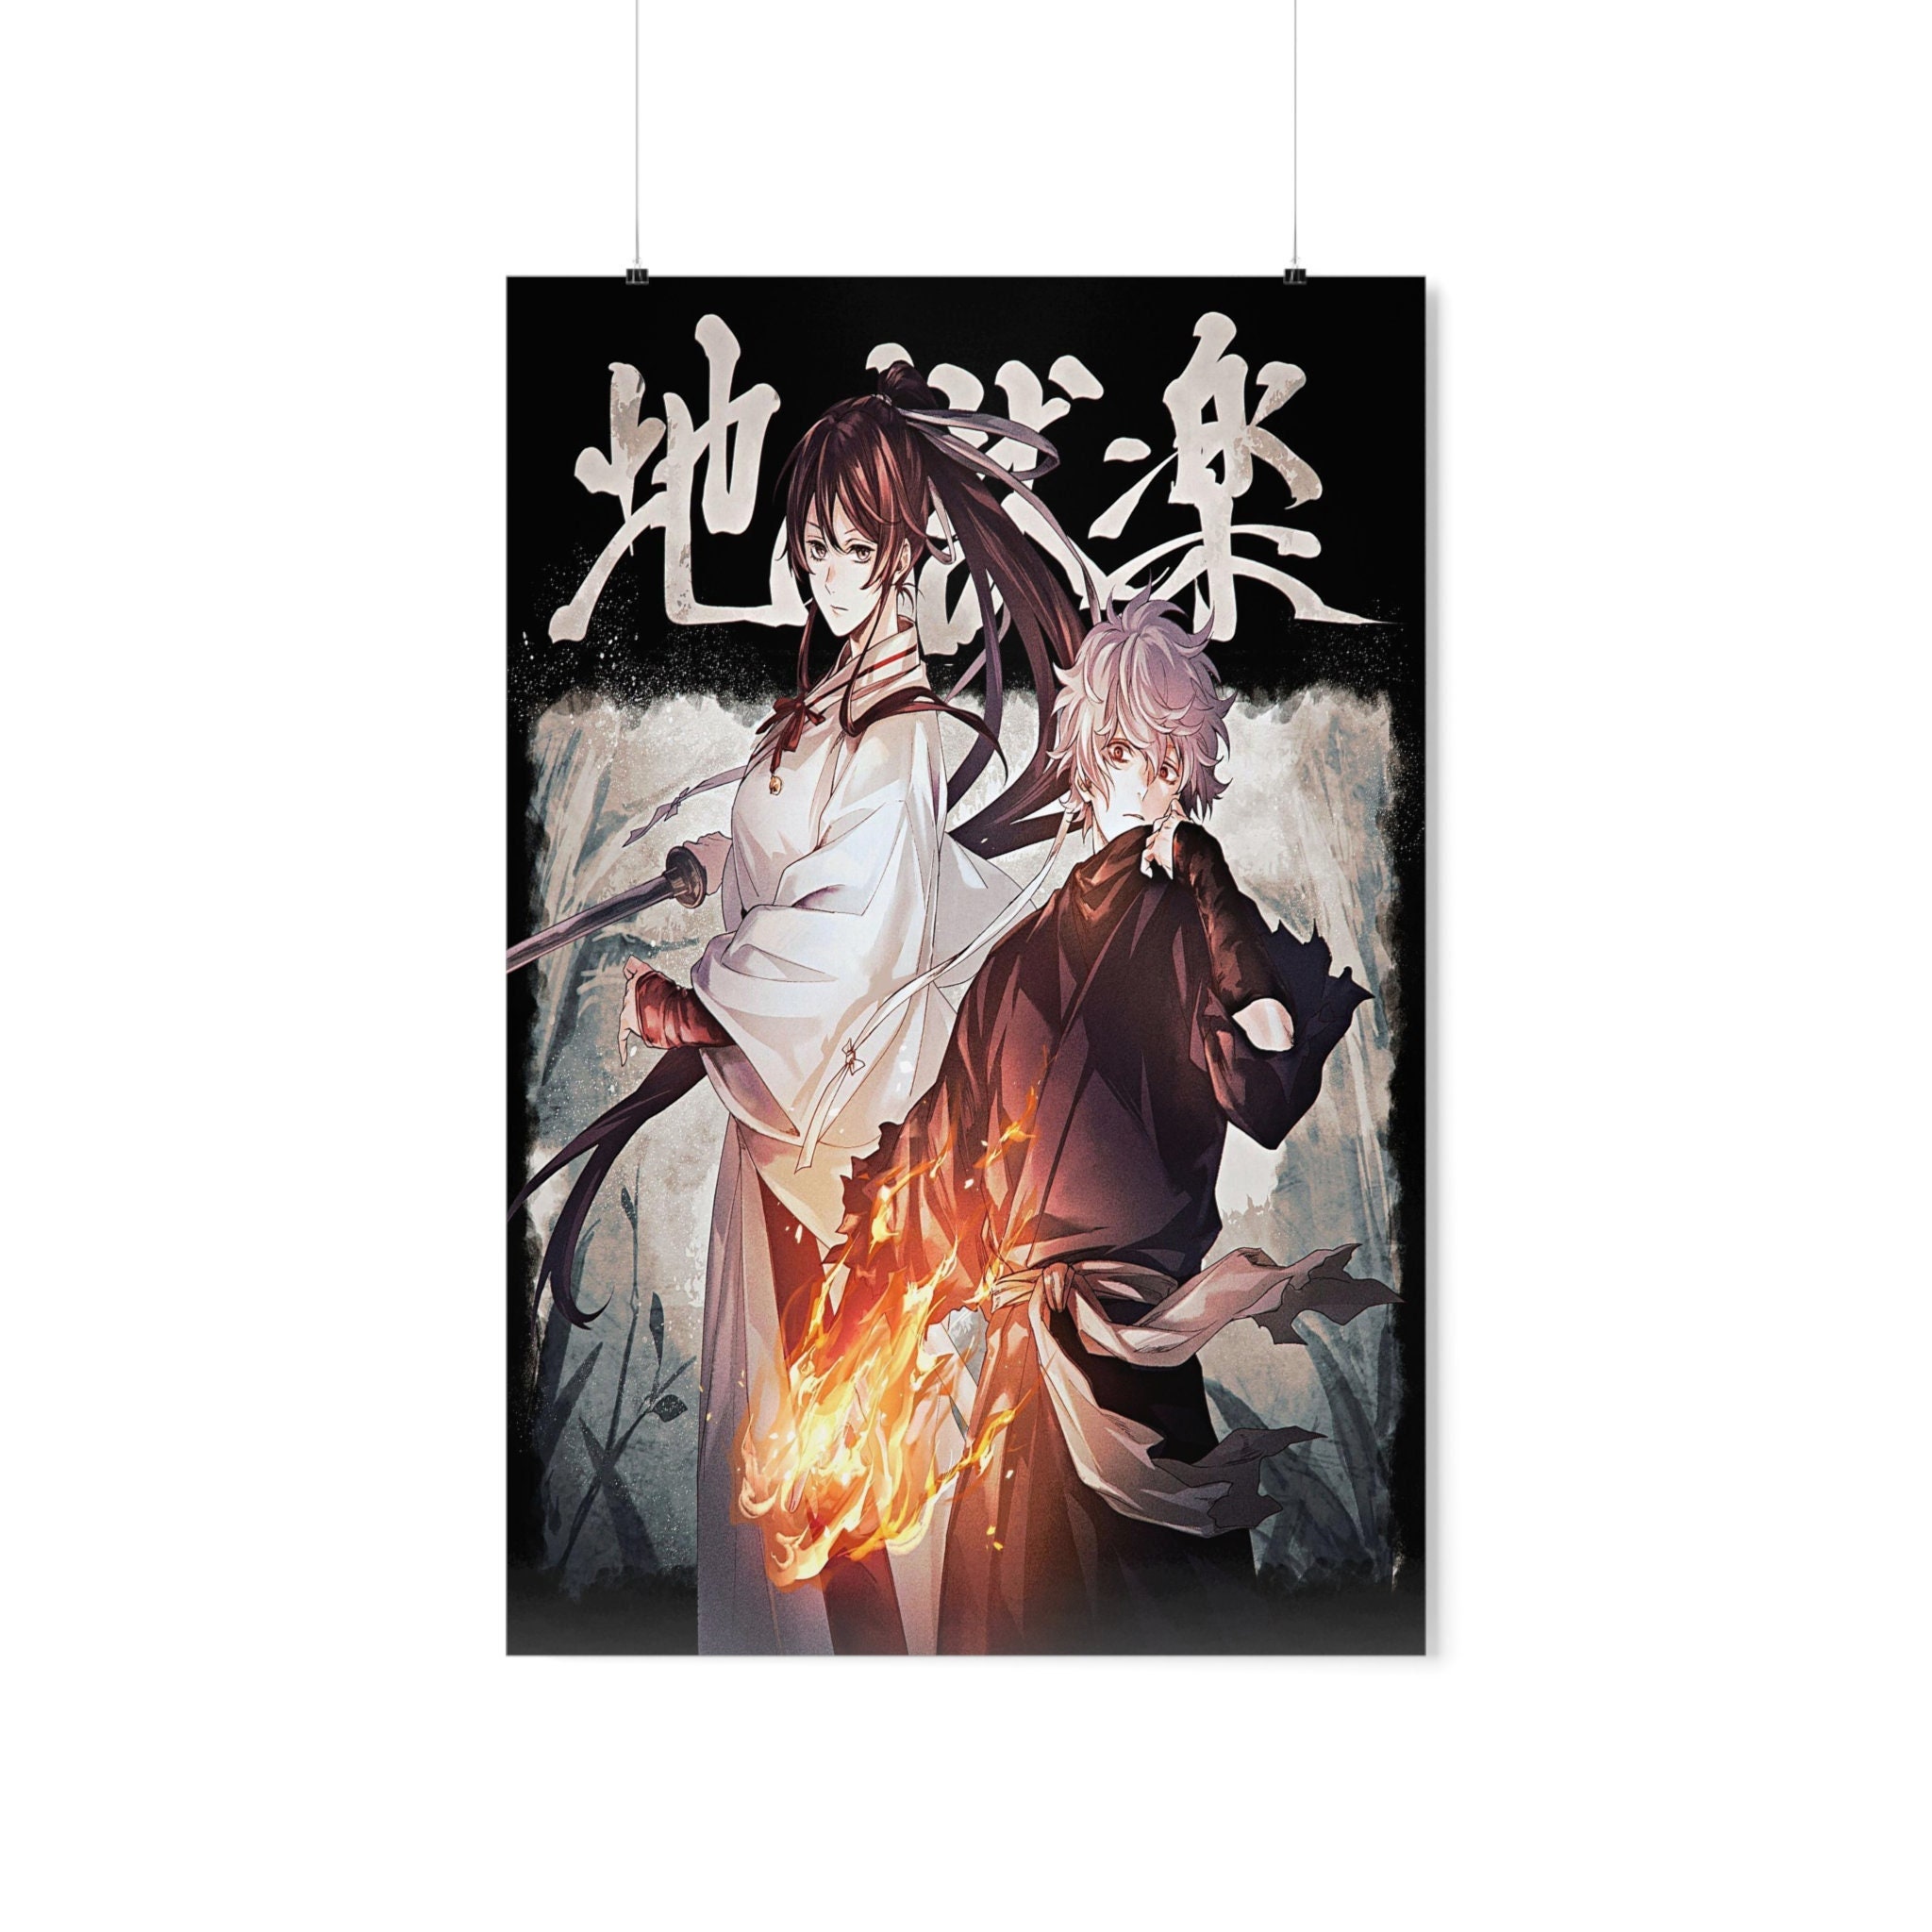  Hell's Paradise Jigokuraku Art Anime Cover Poster Art Poster  Canvas Painting Decor Wall Print Photo Gifts Home Modern Decorative Posters  Framed/Unframed 20x30inch(50x75cm): Posters & Prints